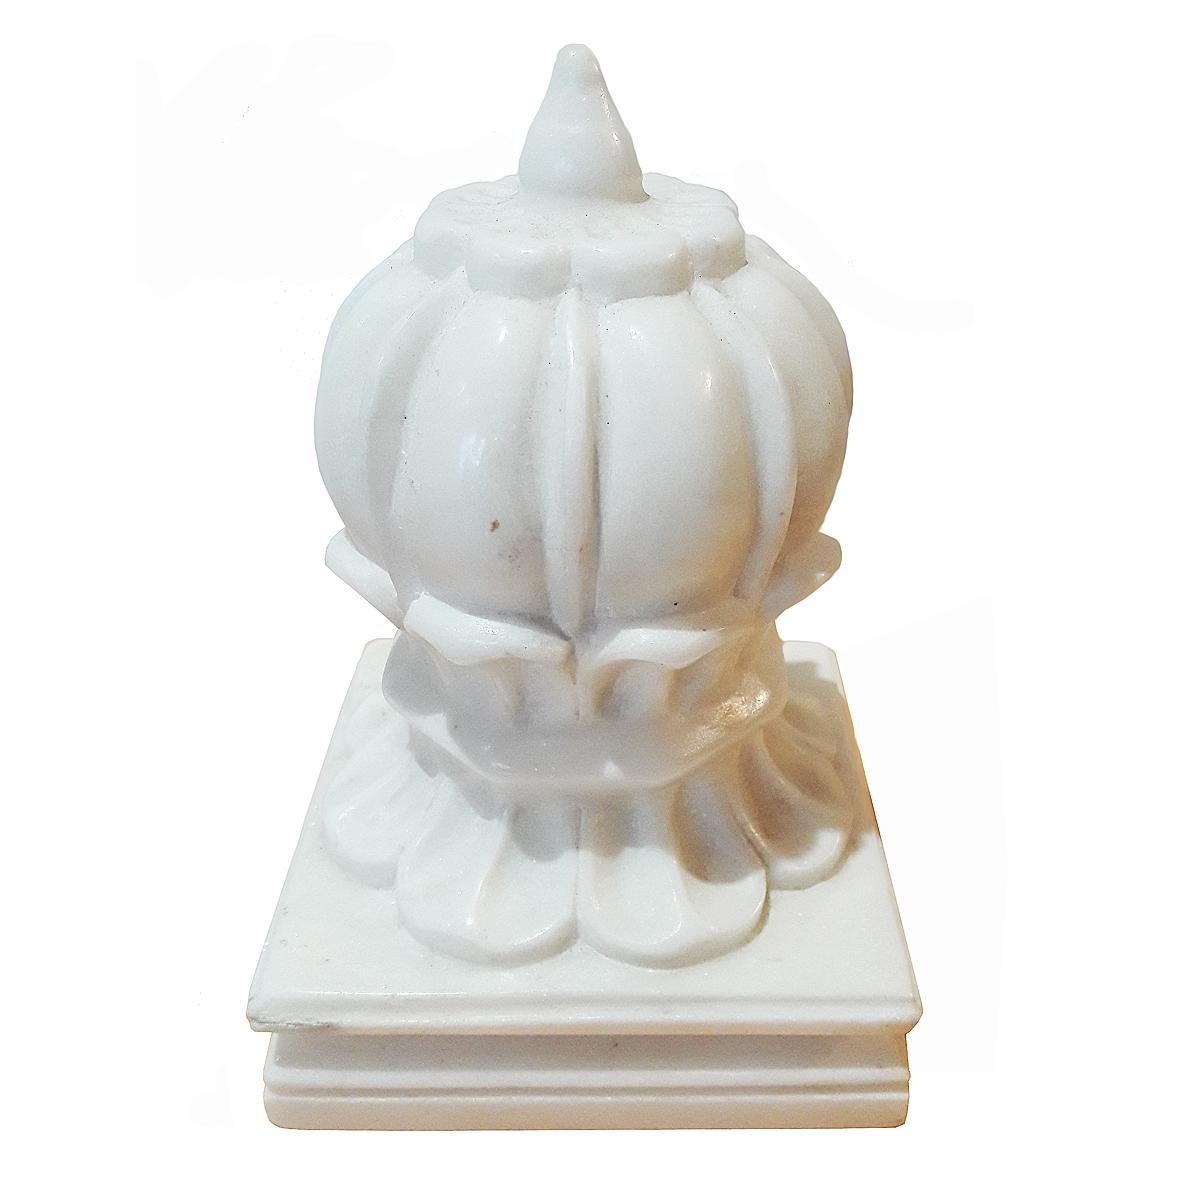 A small carpet weight from India, hand carved in white marble, circa 1980. Can also be used as an elegant paperweight or bookend.